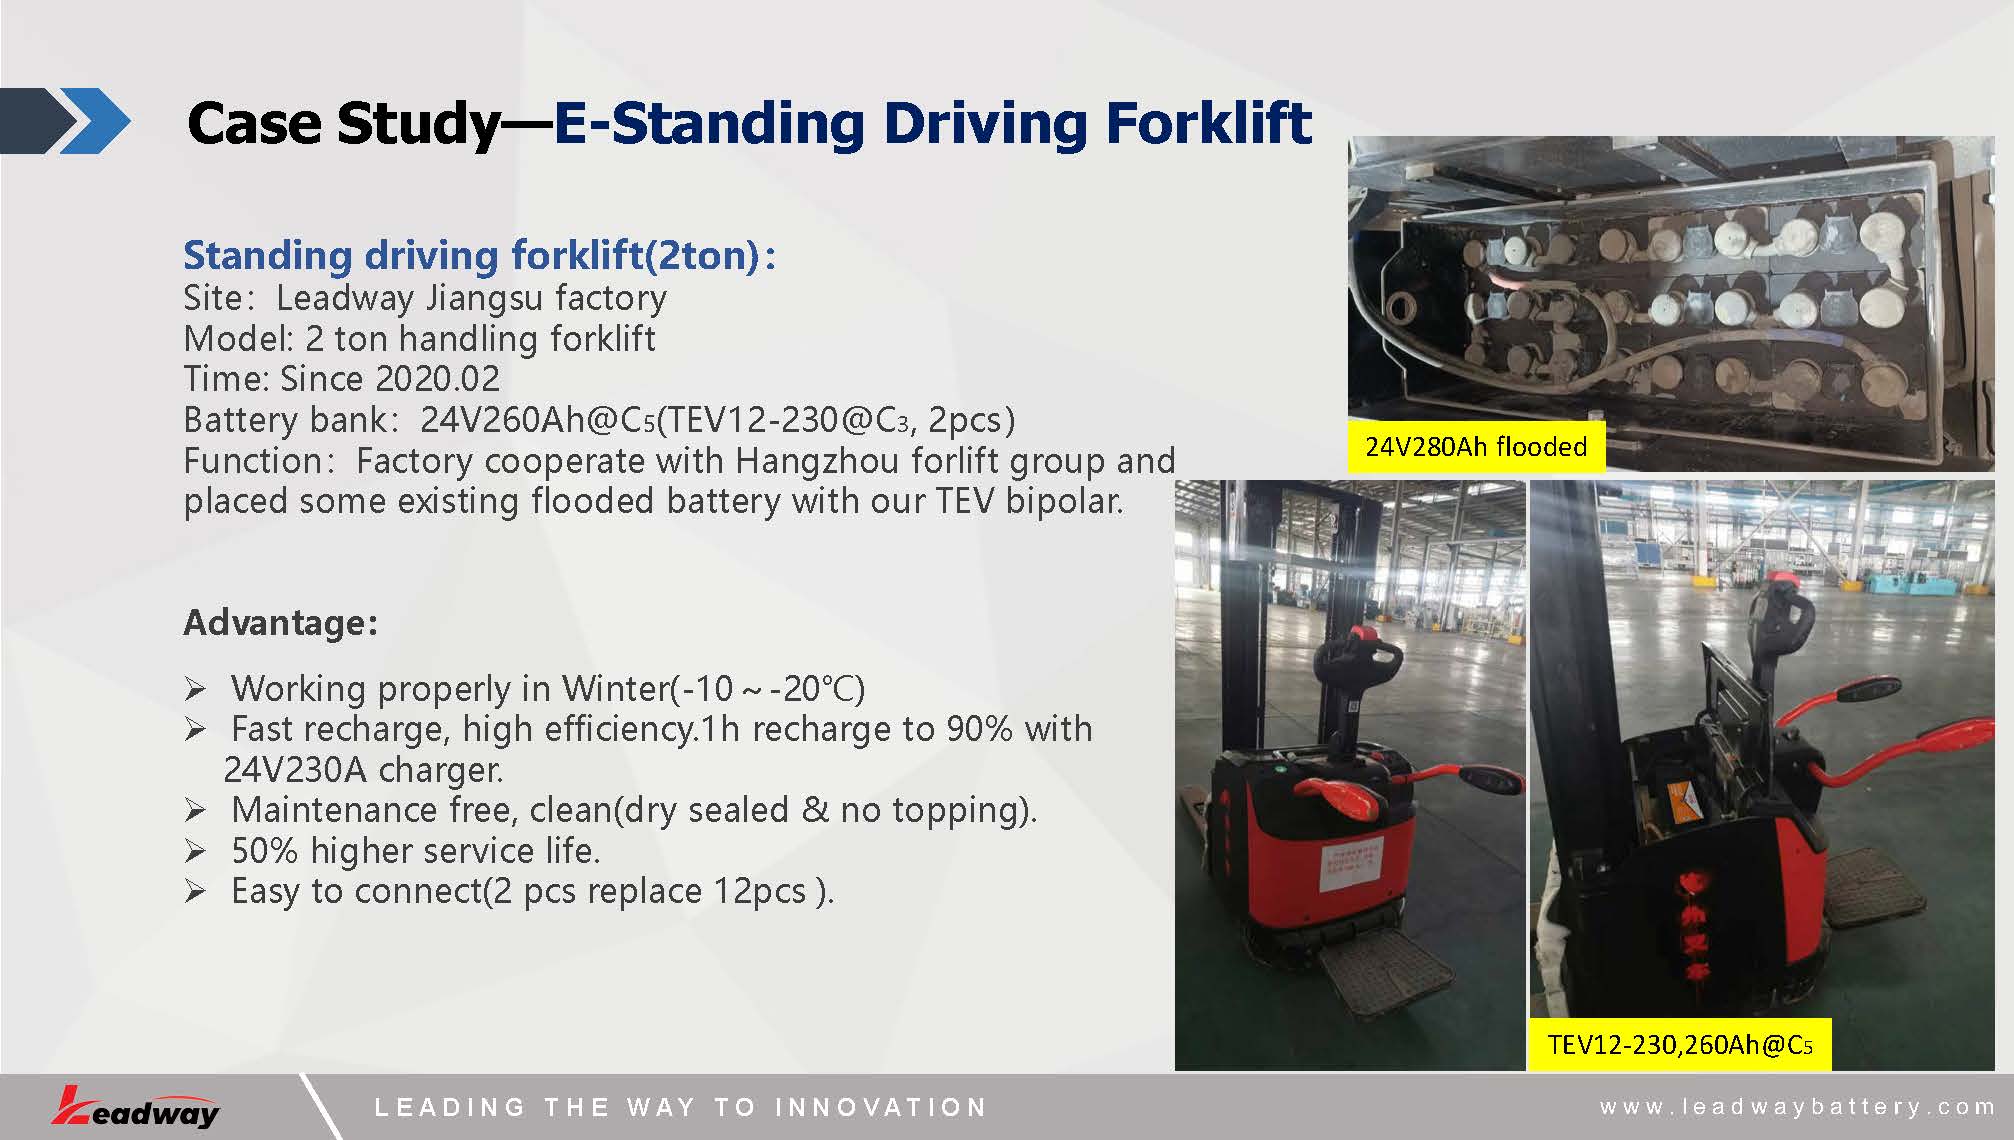 Case Study—E-Standing Driving Forklift